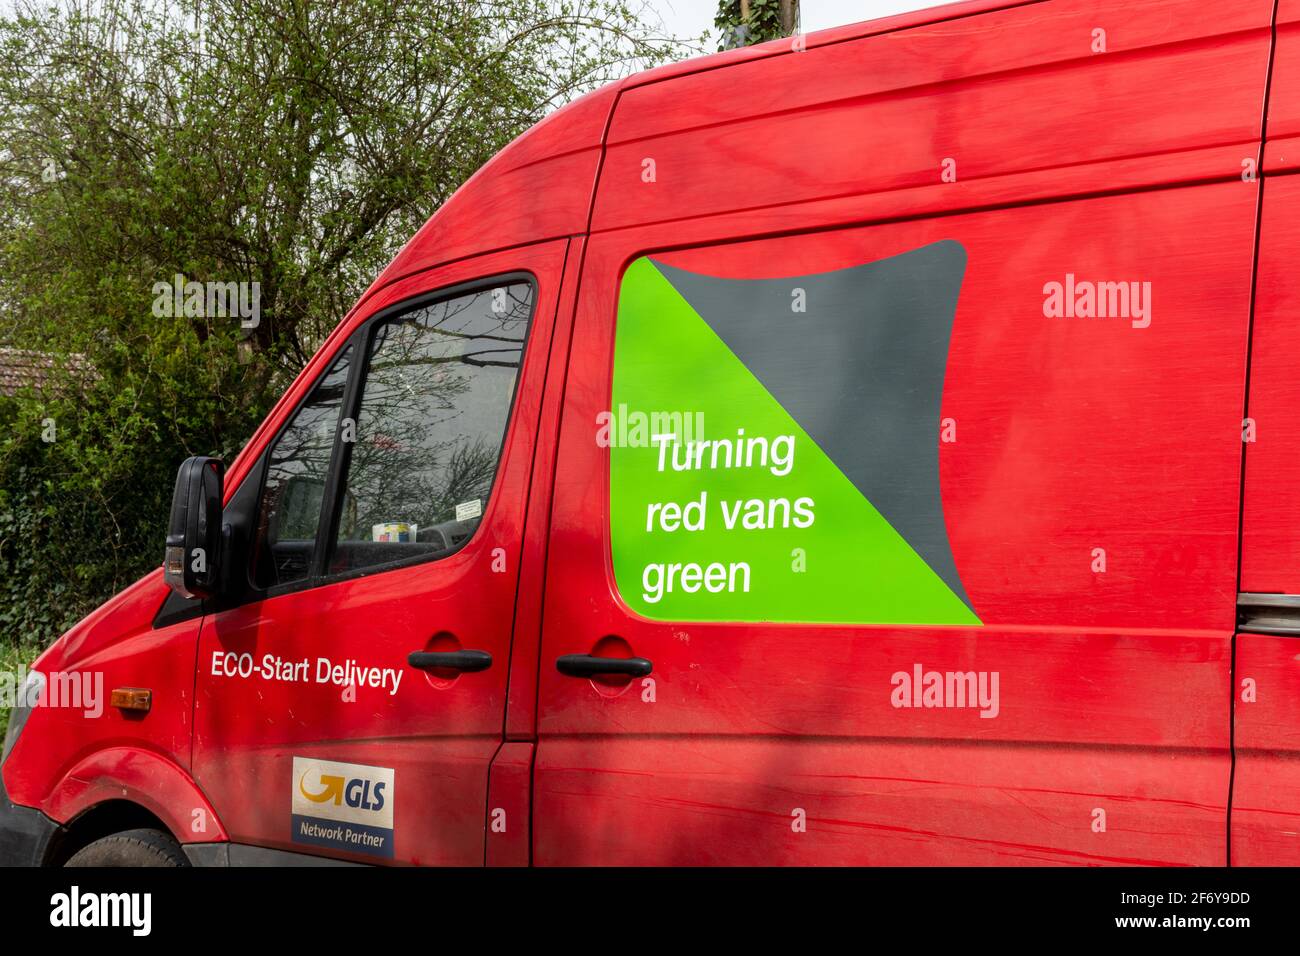 Parcelforce worldwide red van with eco-friendly slogan Turning Red Vans Green on the side, UK Stock Photo